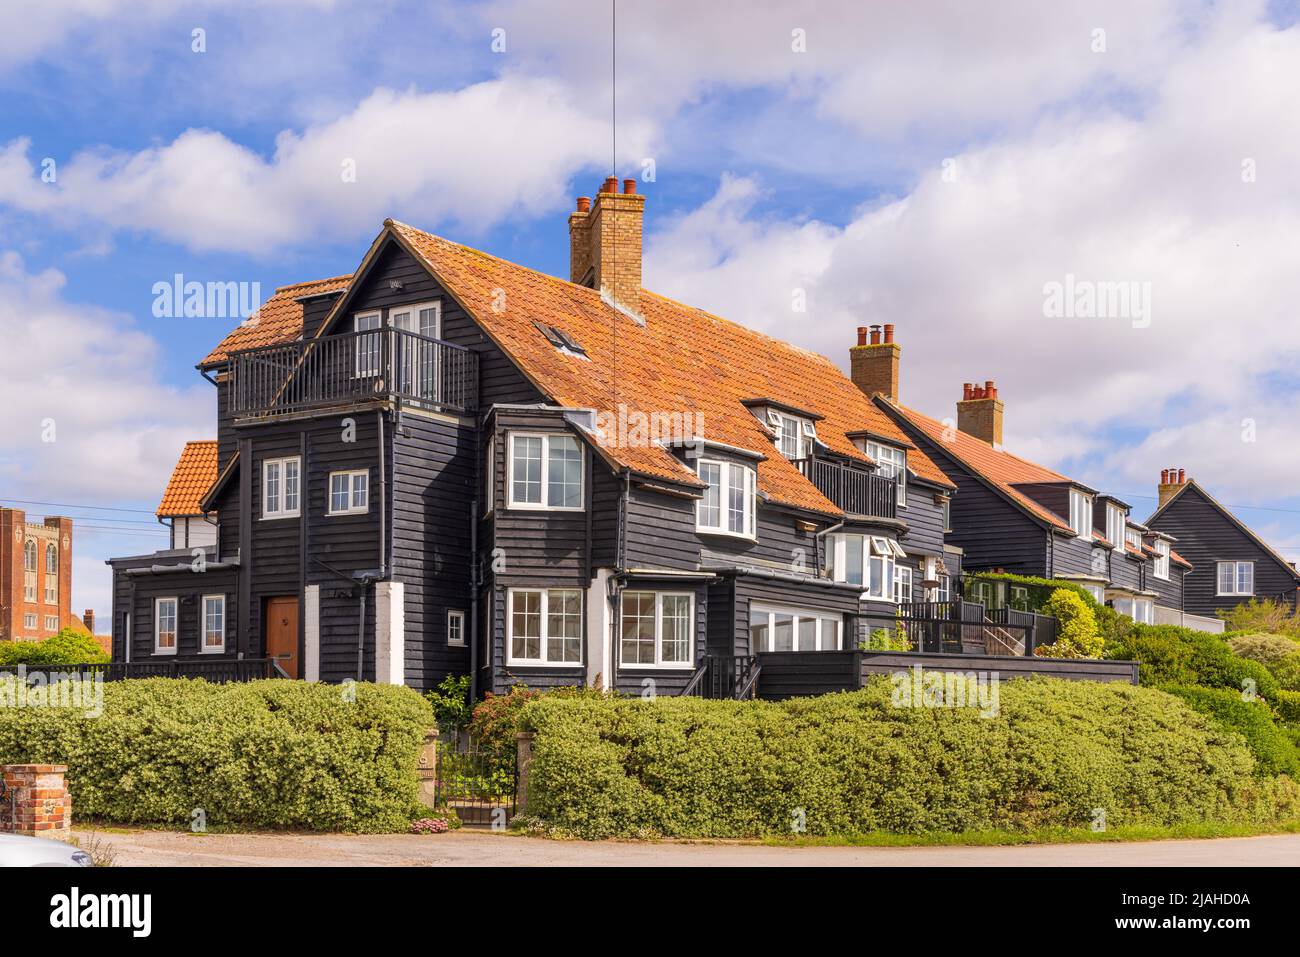 Attractive timber clad houses in the village of Thorpeness, Suffolk. UK Stock Photo